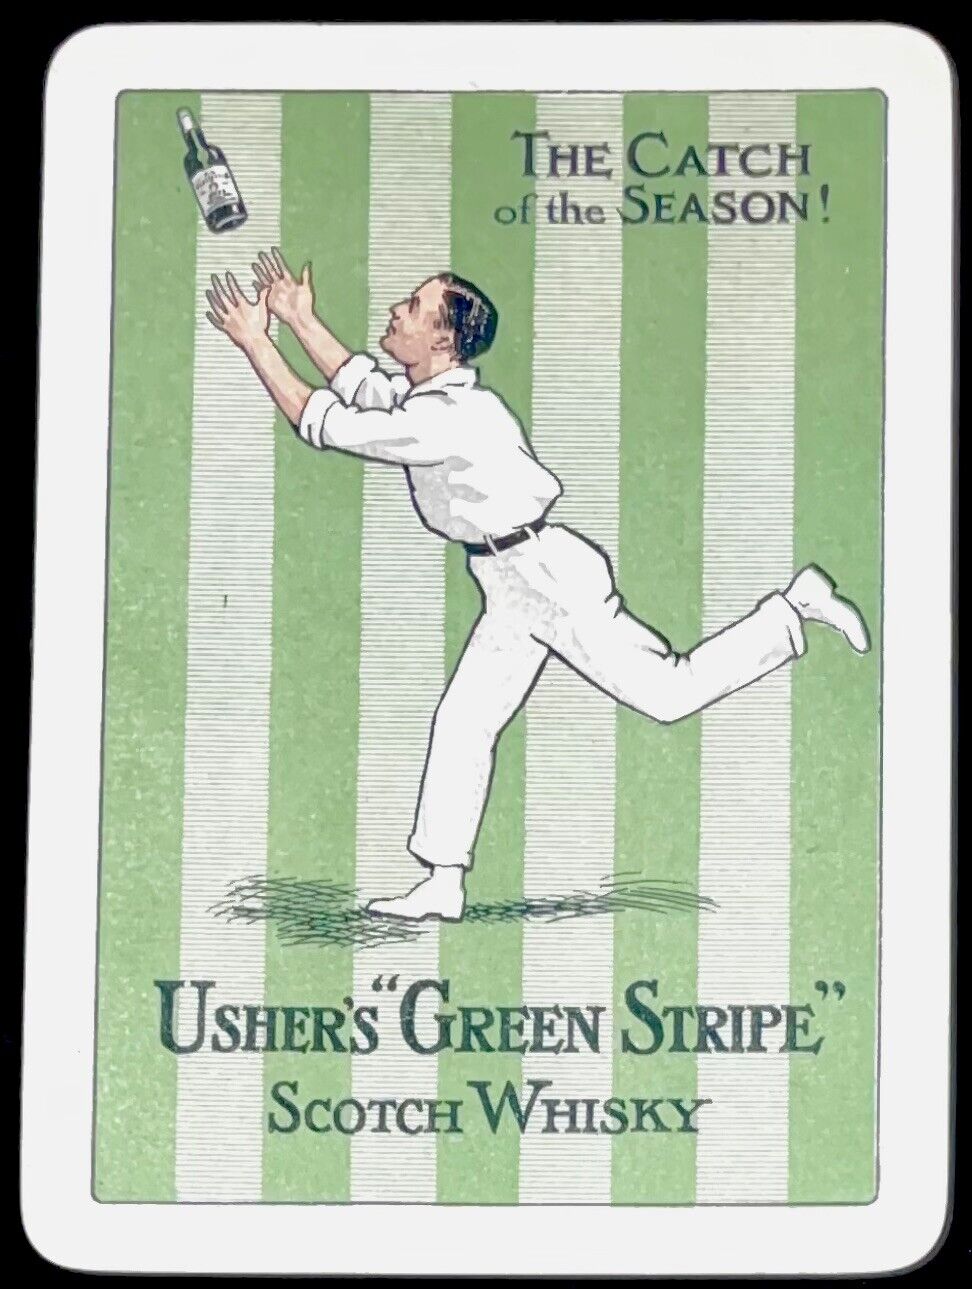 DR62 Swap Playing Cards 1 VINTAGE WHISKY ADVT USHER’S GREEN STRIPE CRICKETER